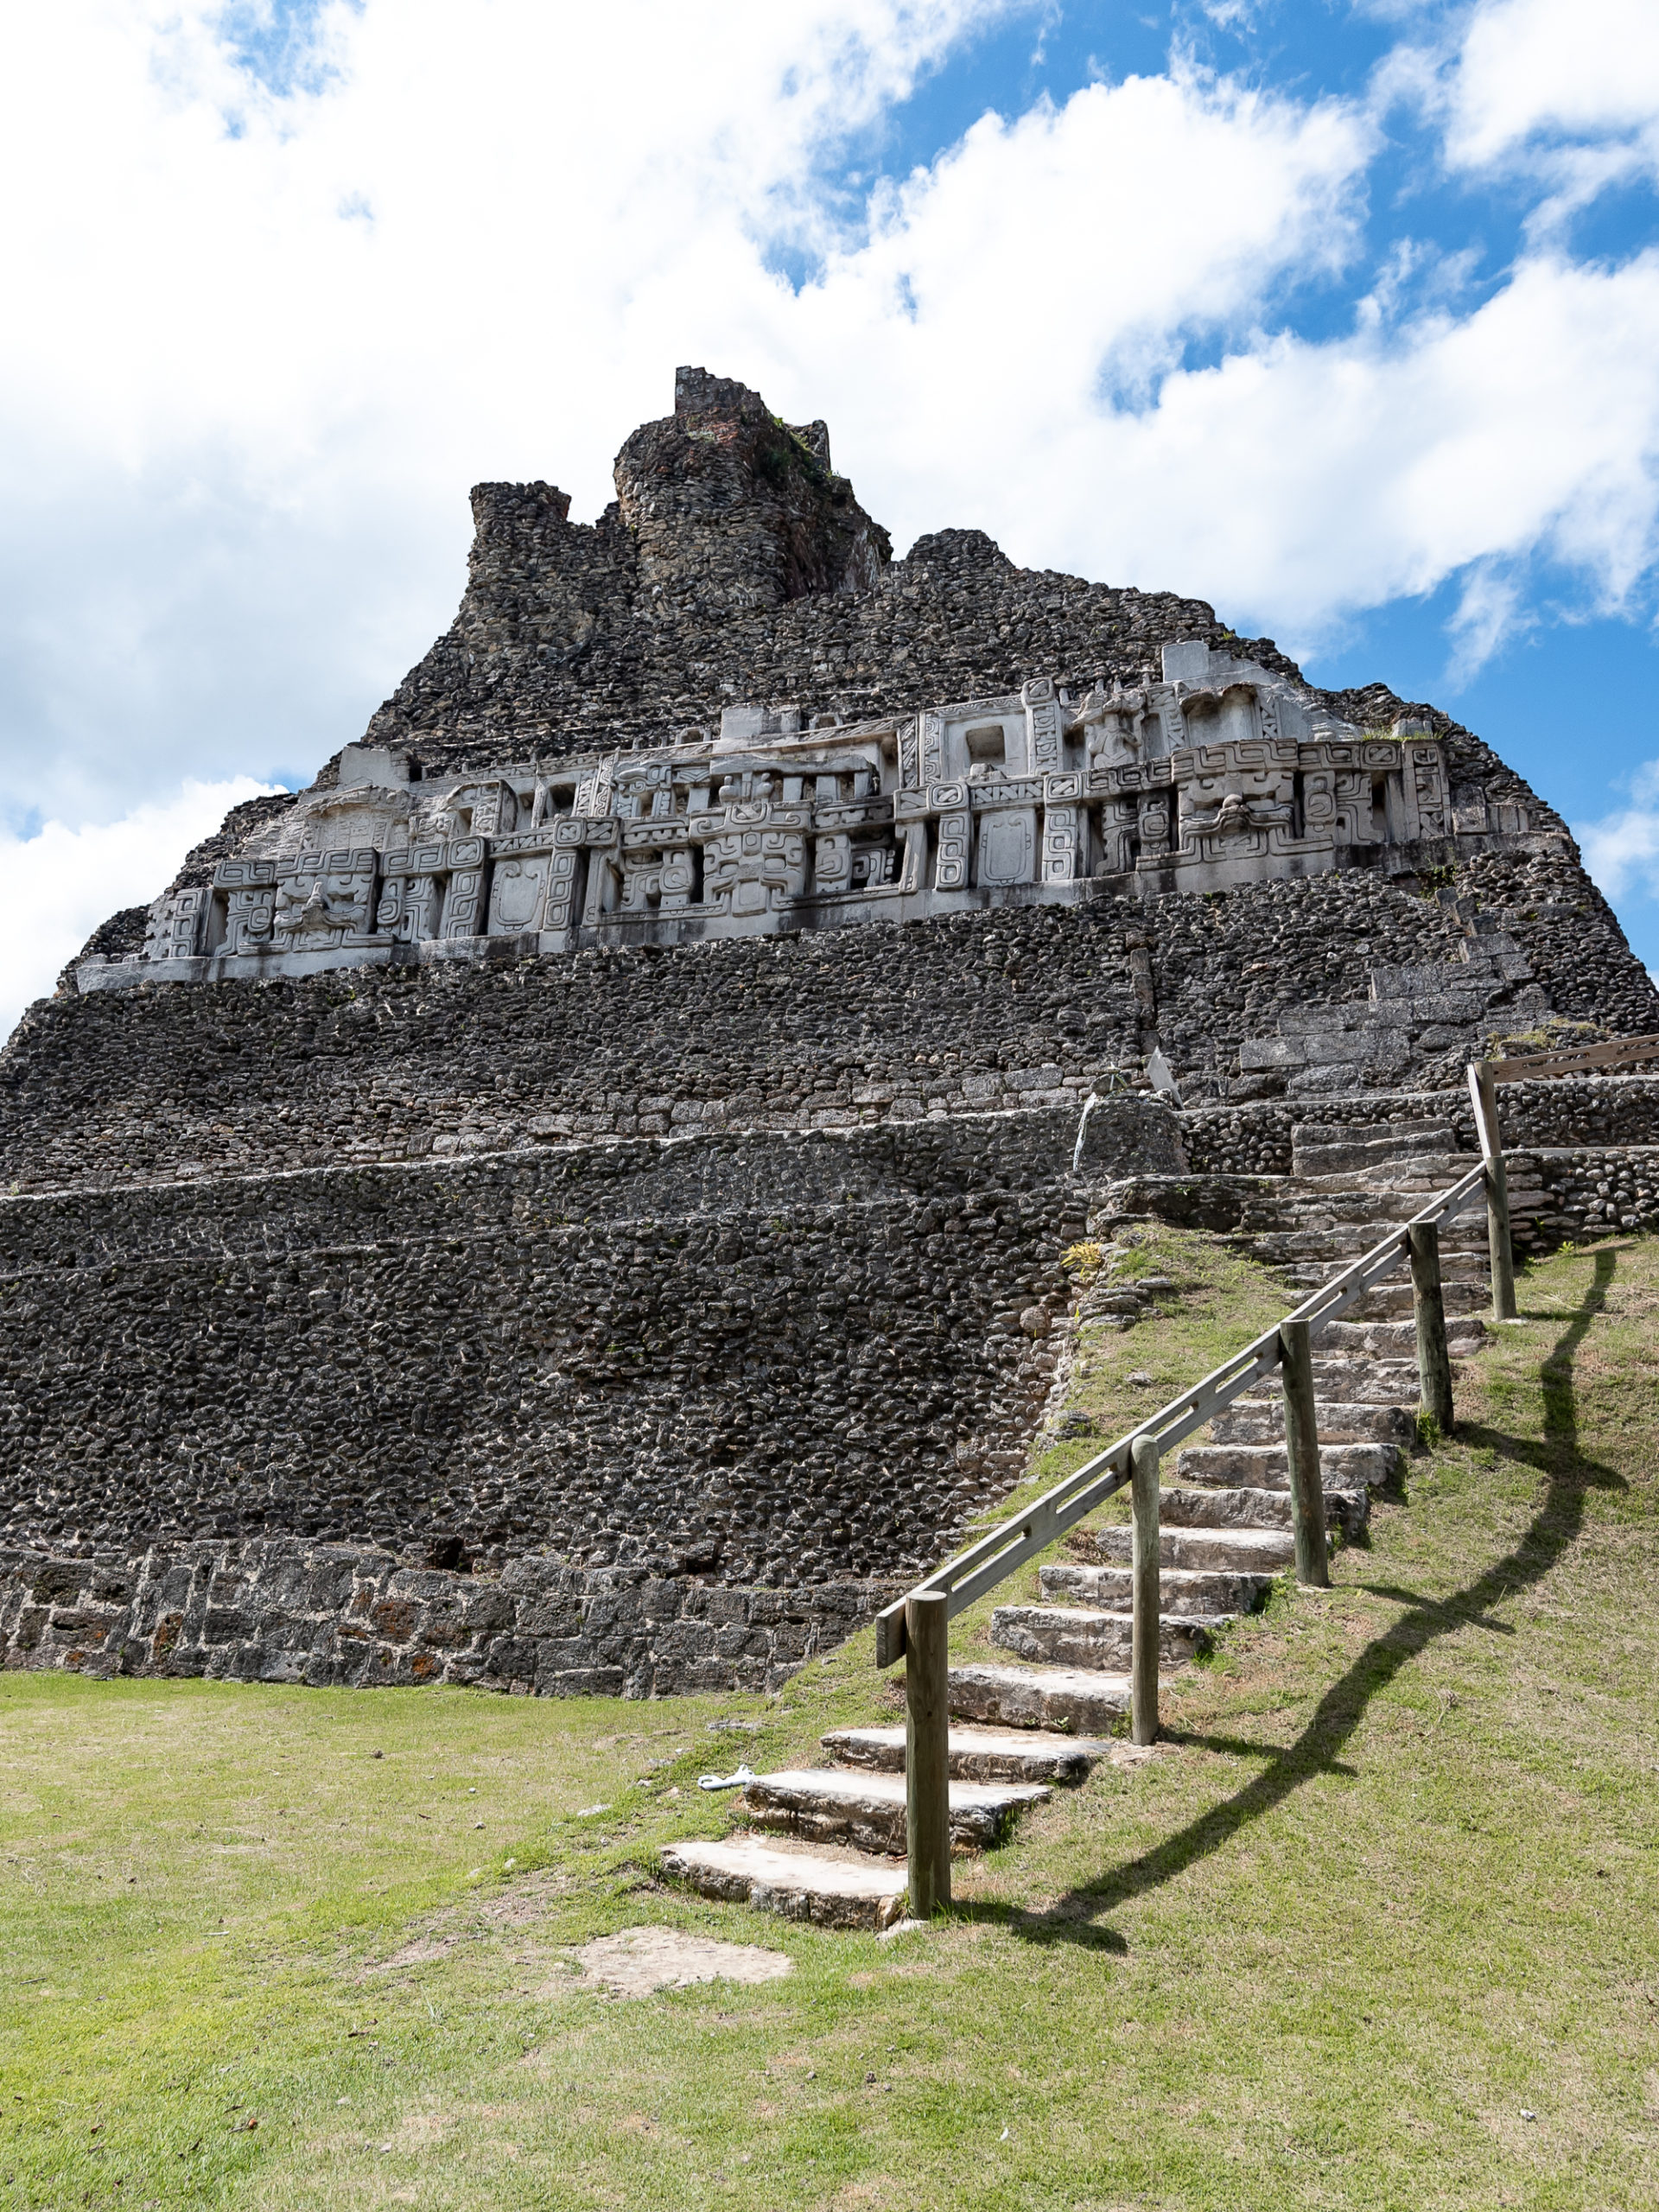 Mayan ruins of Xunantunich, best places to go in Belize, things to see and do in Belize, Belize travel guide